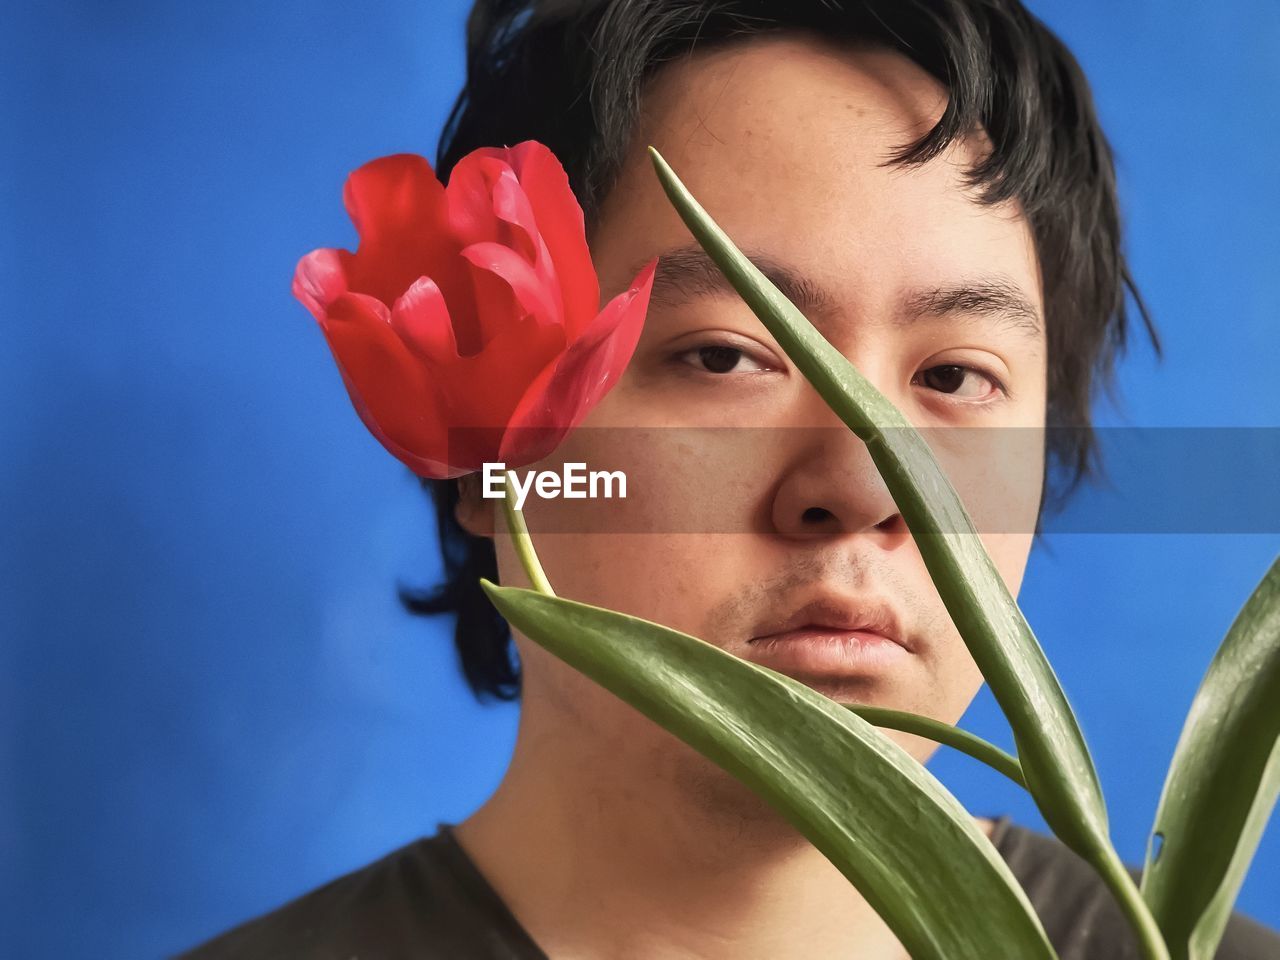 Close-up portrait of young man with red tulip against blue background.